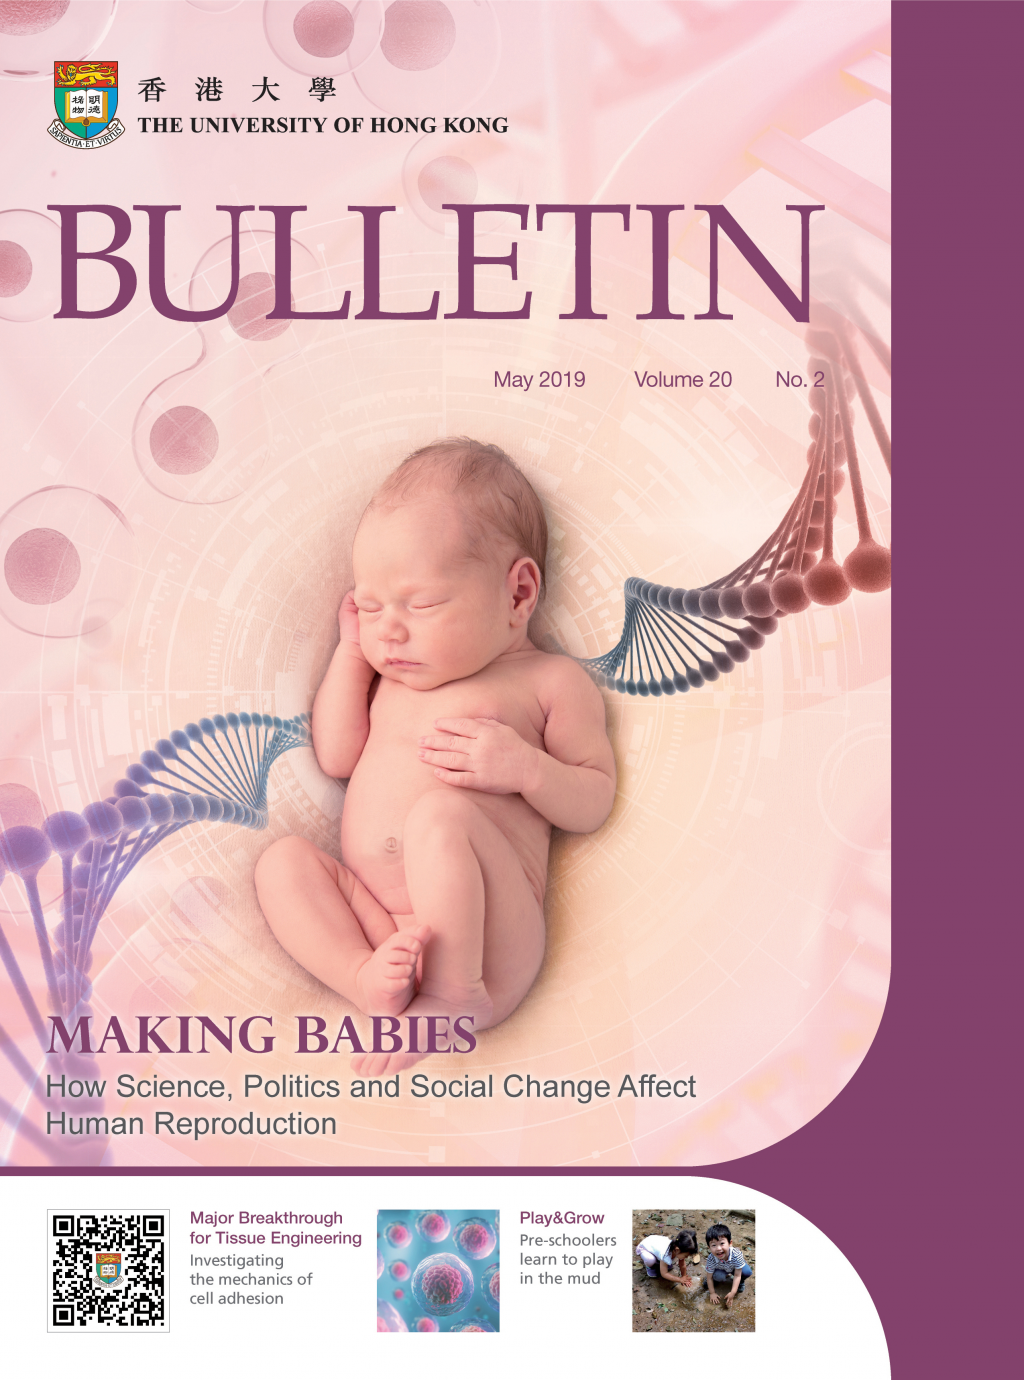 HKU Bulletin May 2019 Issue Available Online